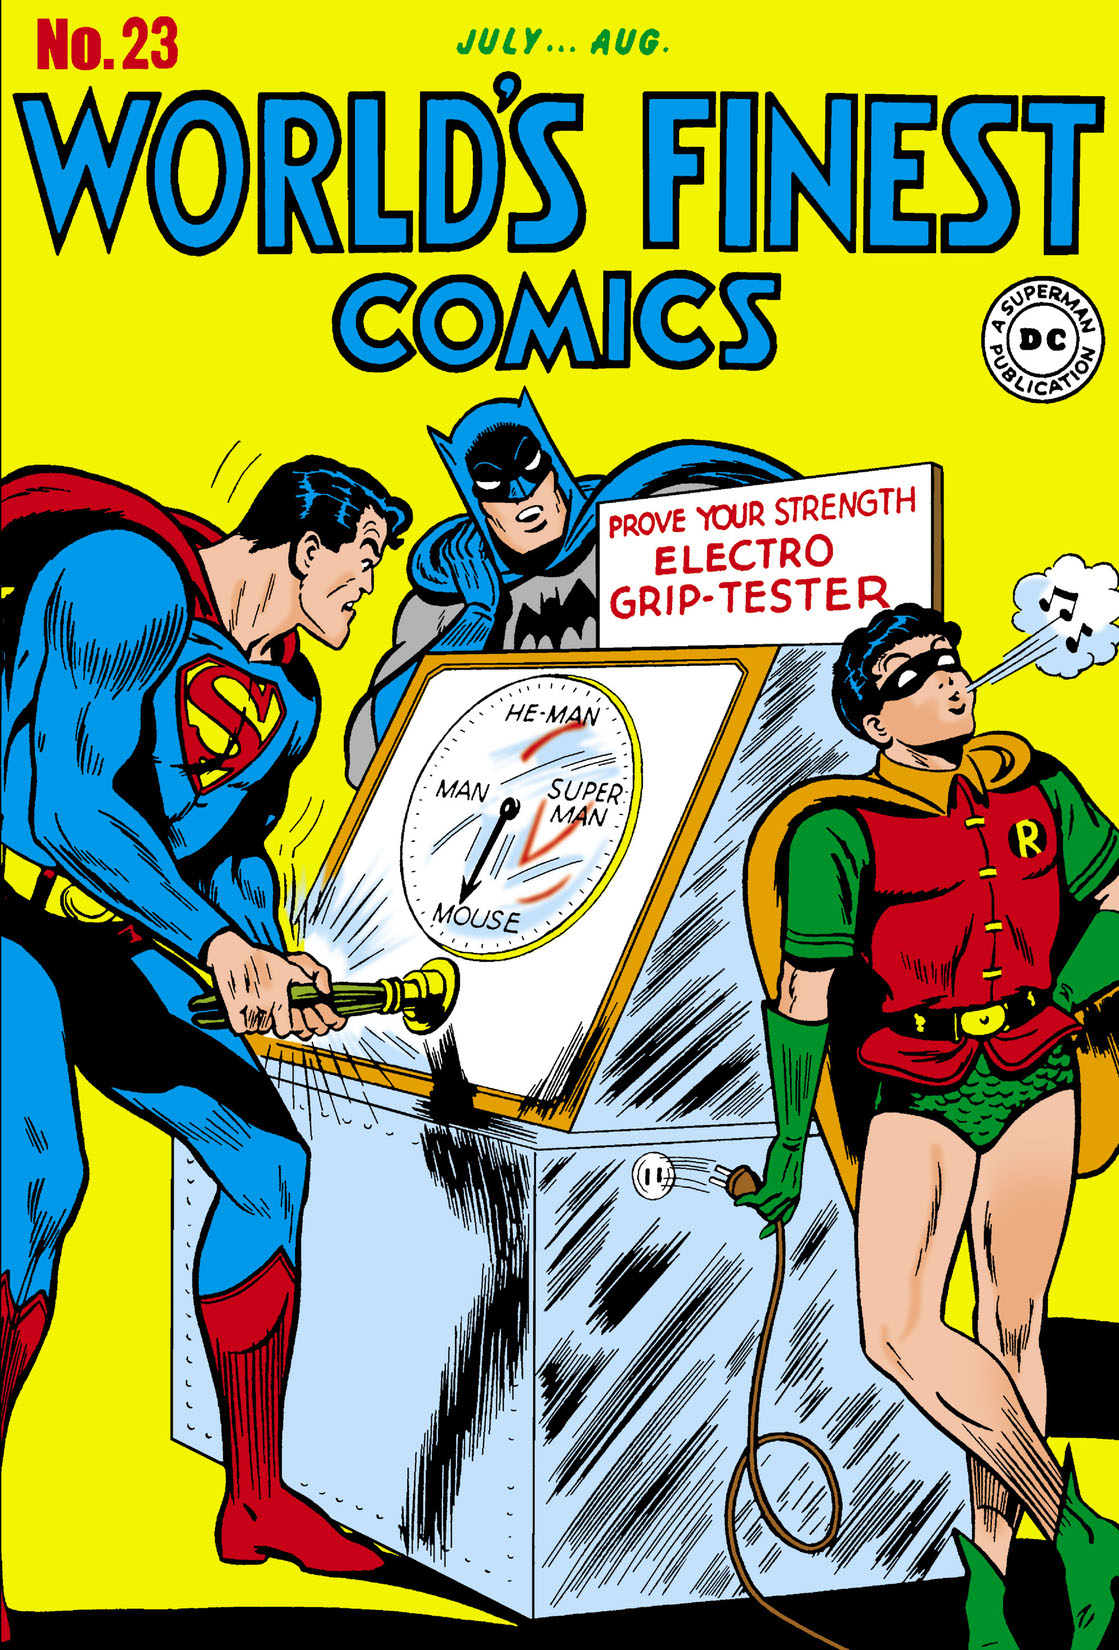 World's Finest Comics (1941-1986) #23 preview images